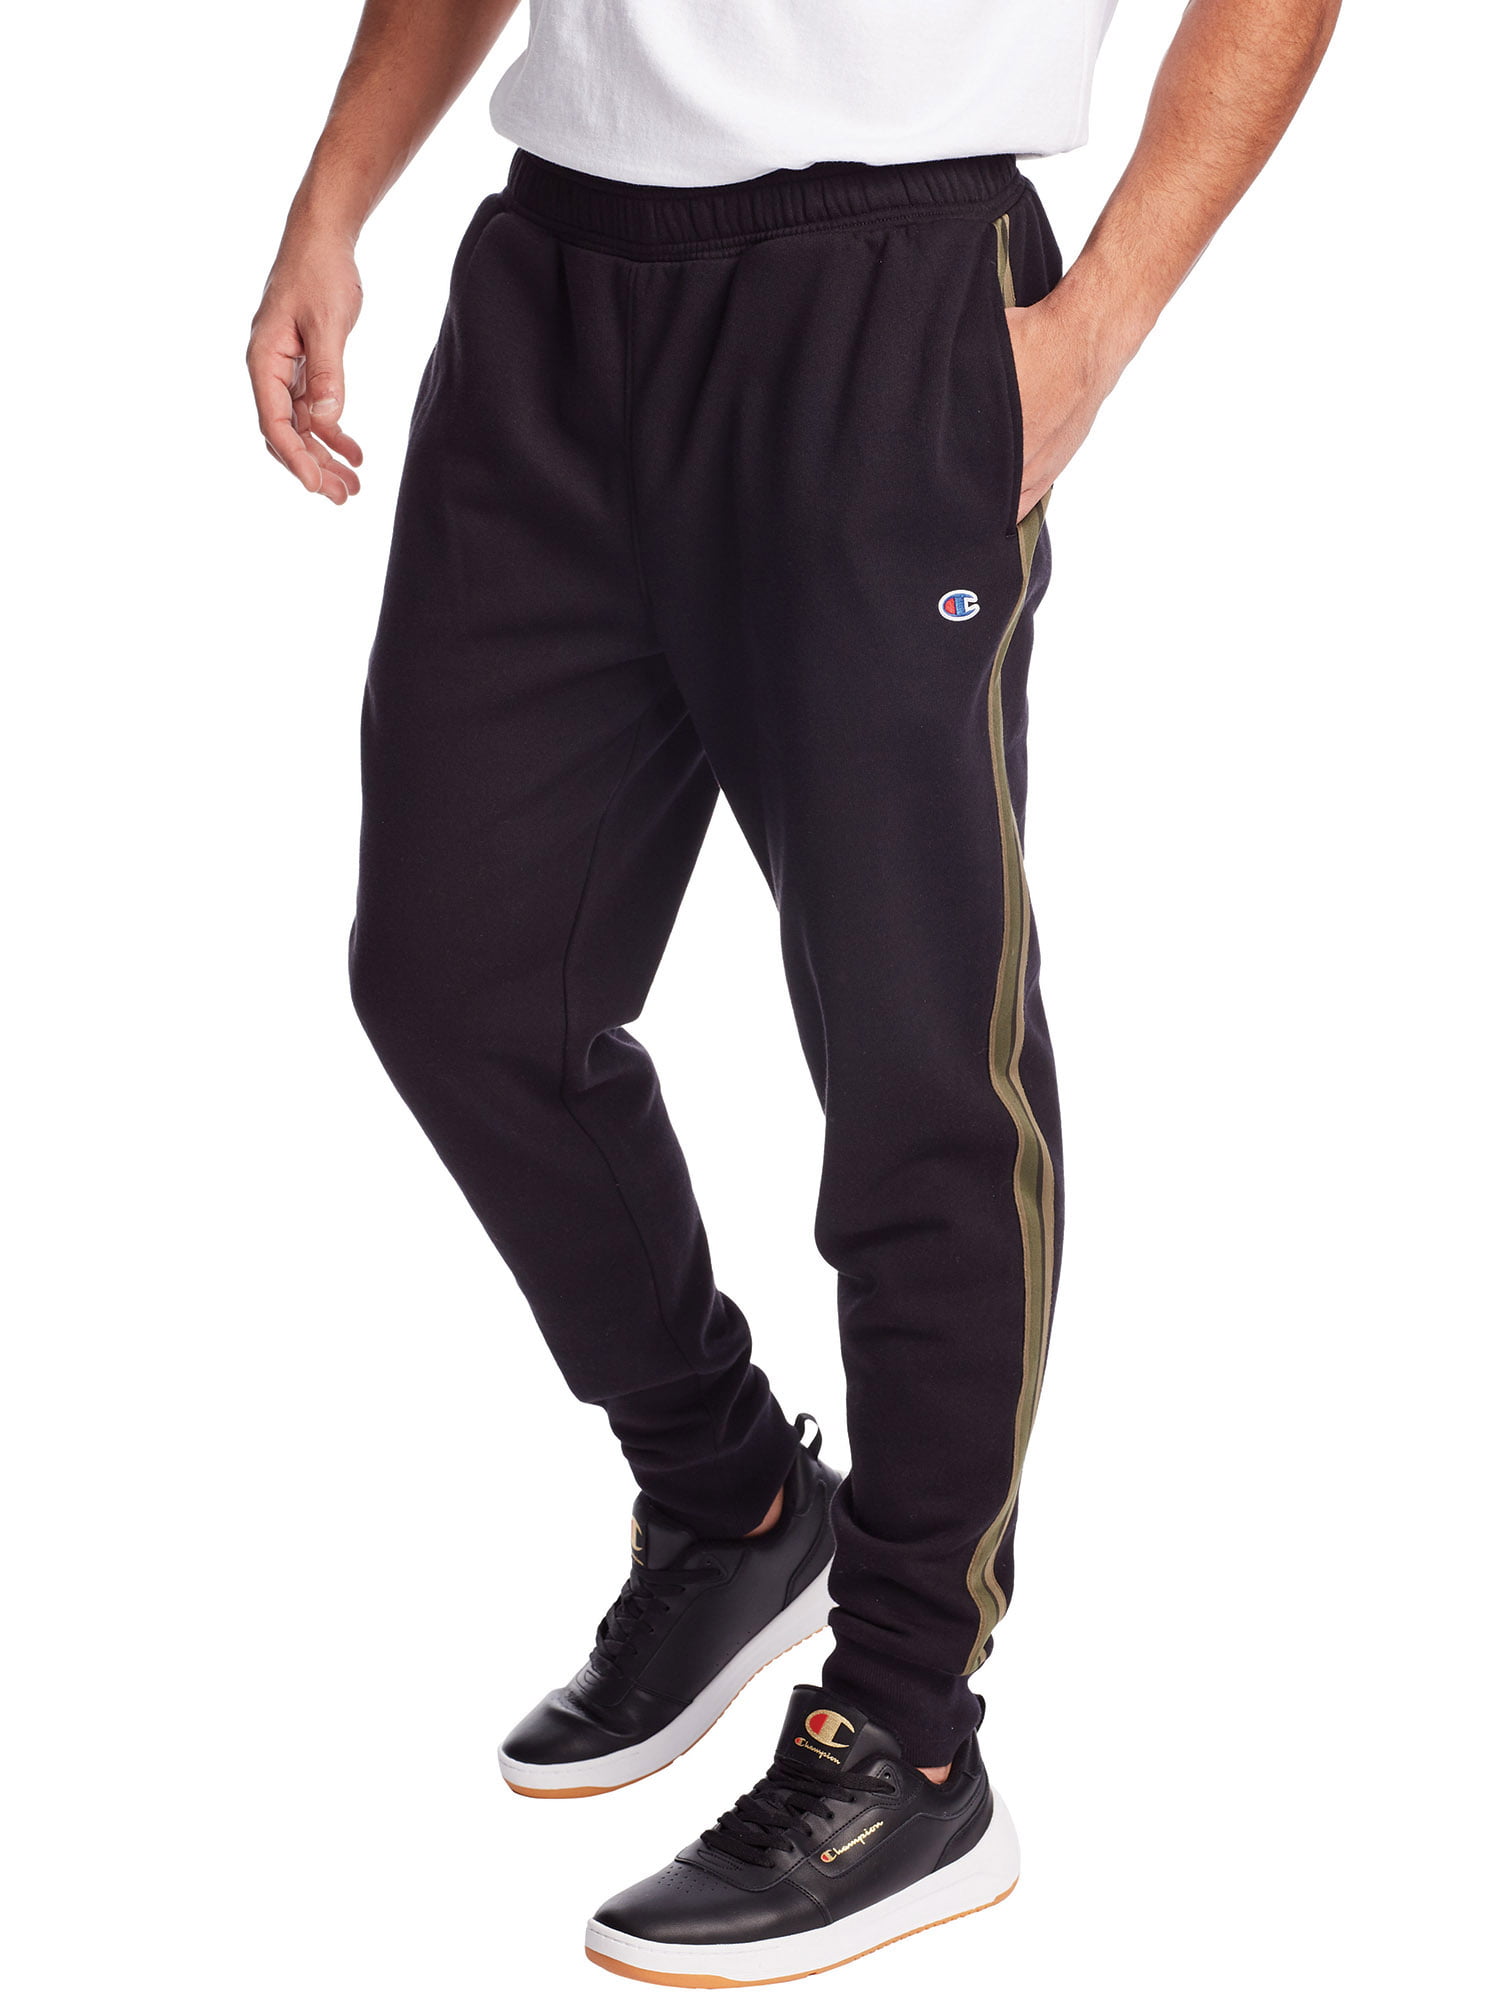 Champion Men's Powerblend Fleece Jogger Sweatpants with Taping, up to ...